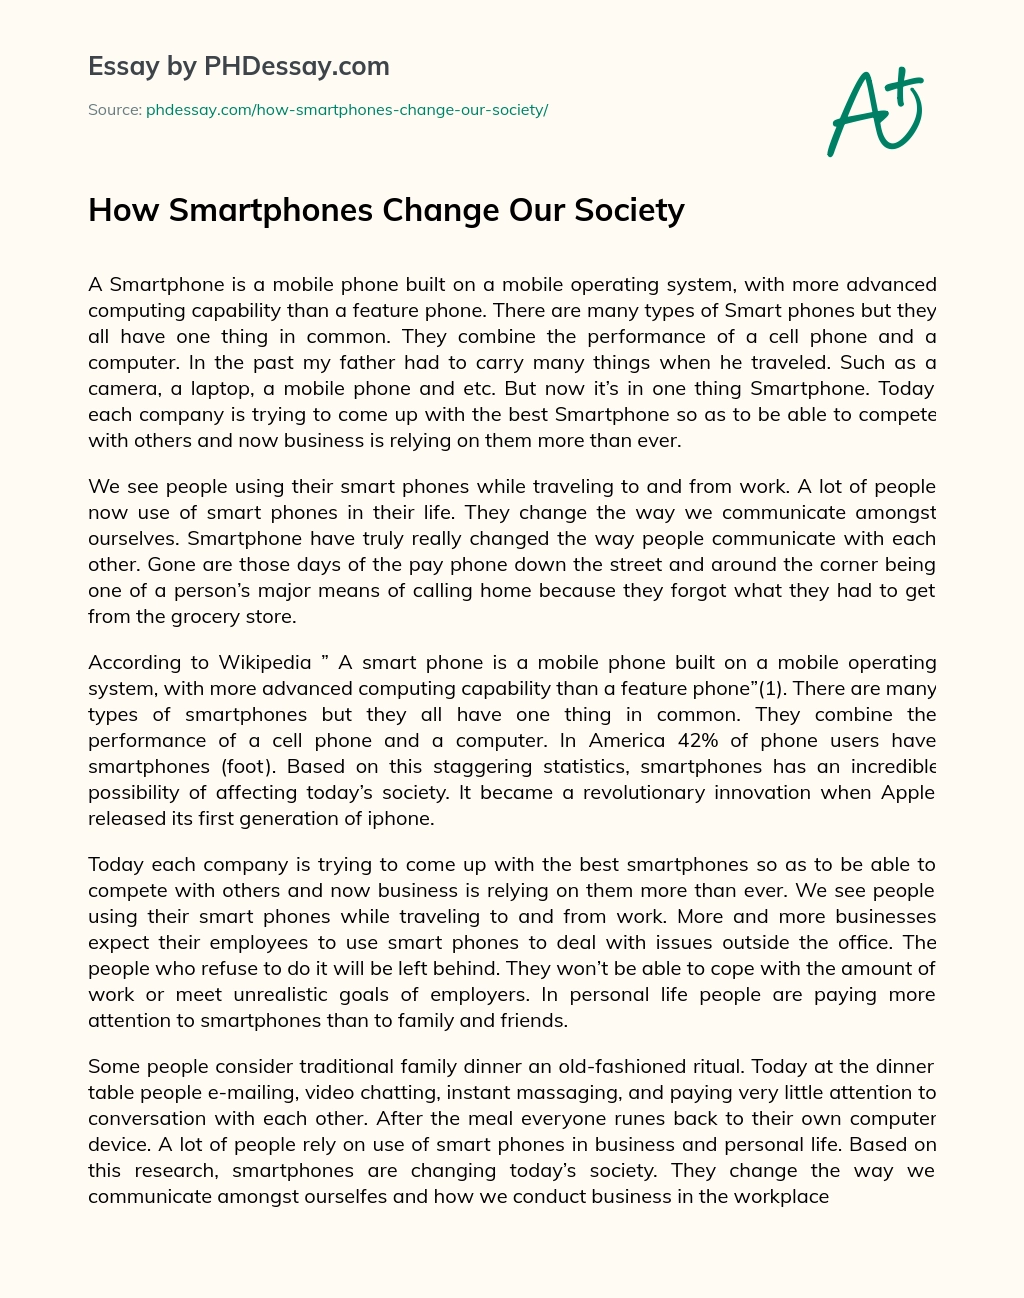 How Smartphones Change Our Society essay